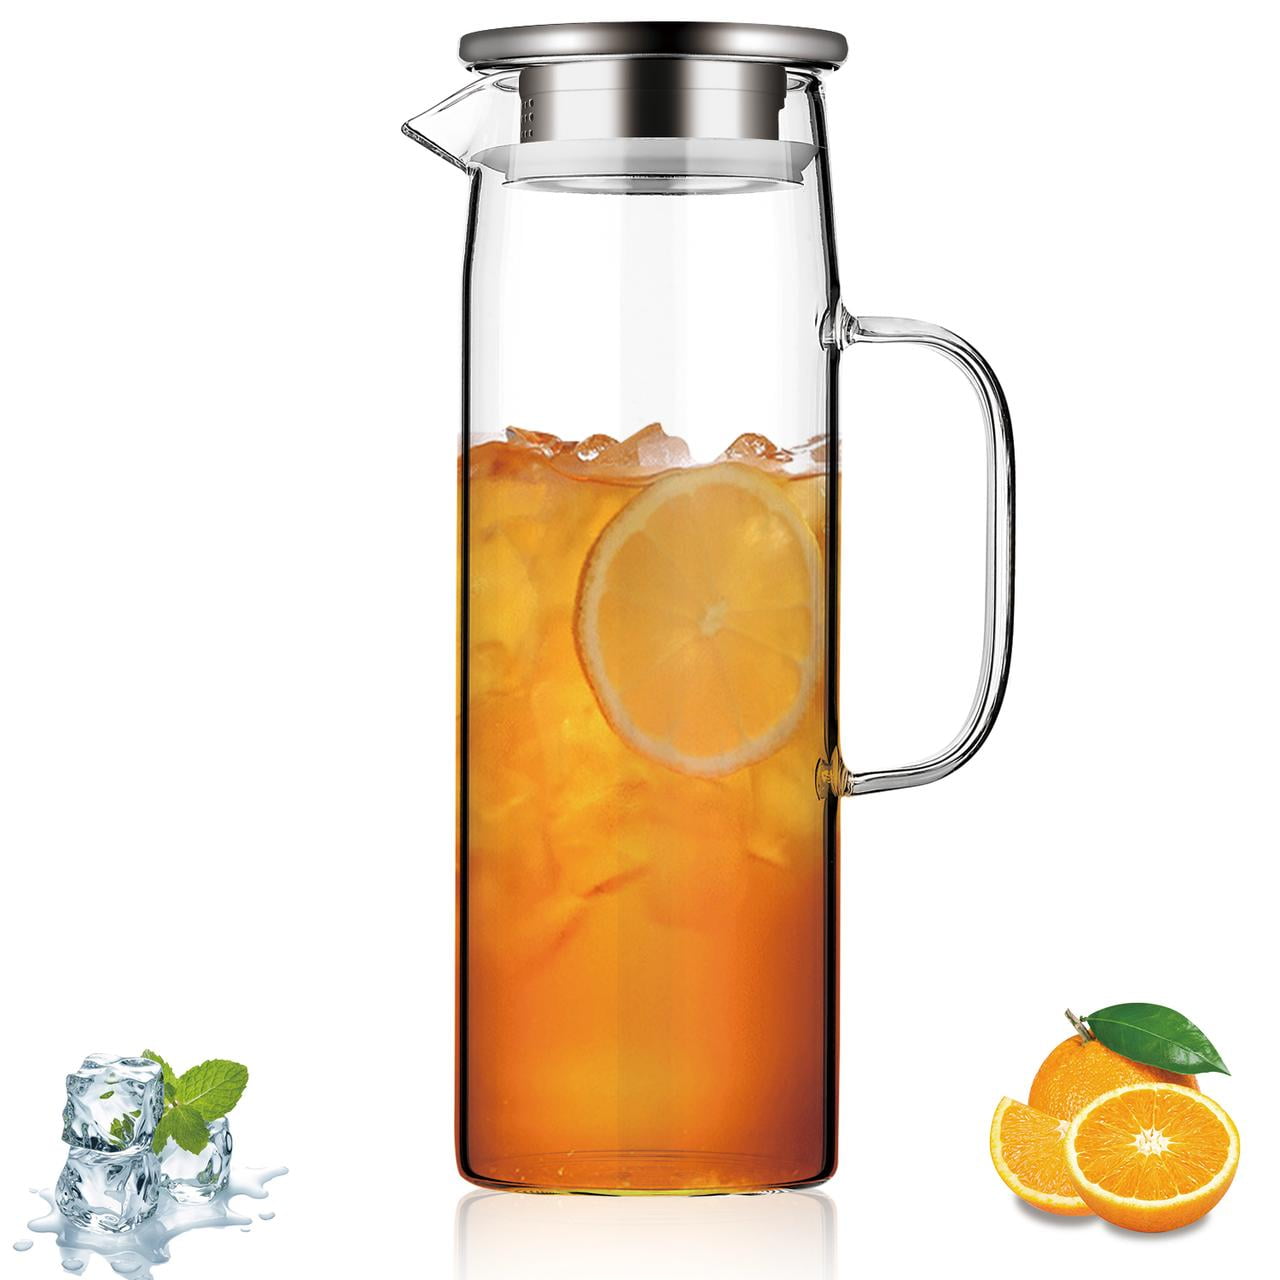 Stainless Steel 2L/0.5 Gal Cold beverage pitcher Ice Tea jug water pot,US seller 